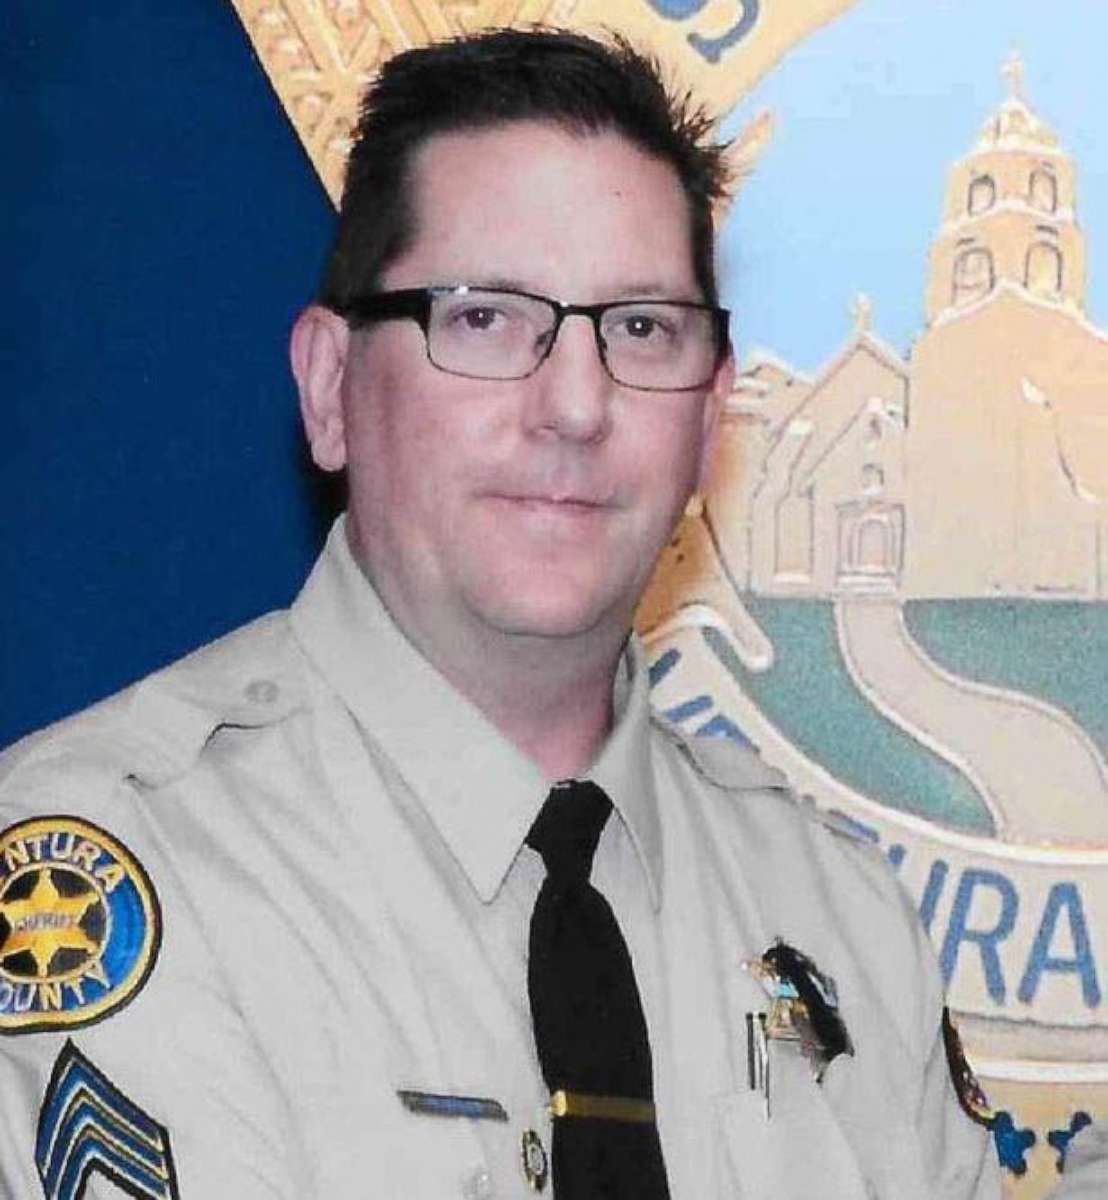 PHOTO: An undated photo of Ventura County Sheriff Sgt. Ron Helus, who was shot and killed in a mass shooting at a Thousands Oaks, Calif., bar, Nov. 7, 2018.